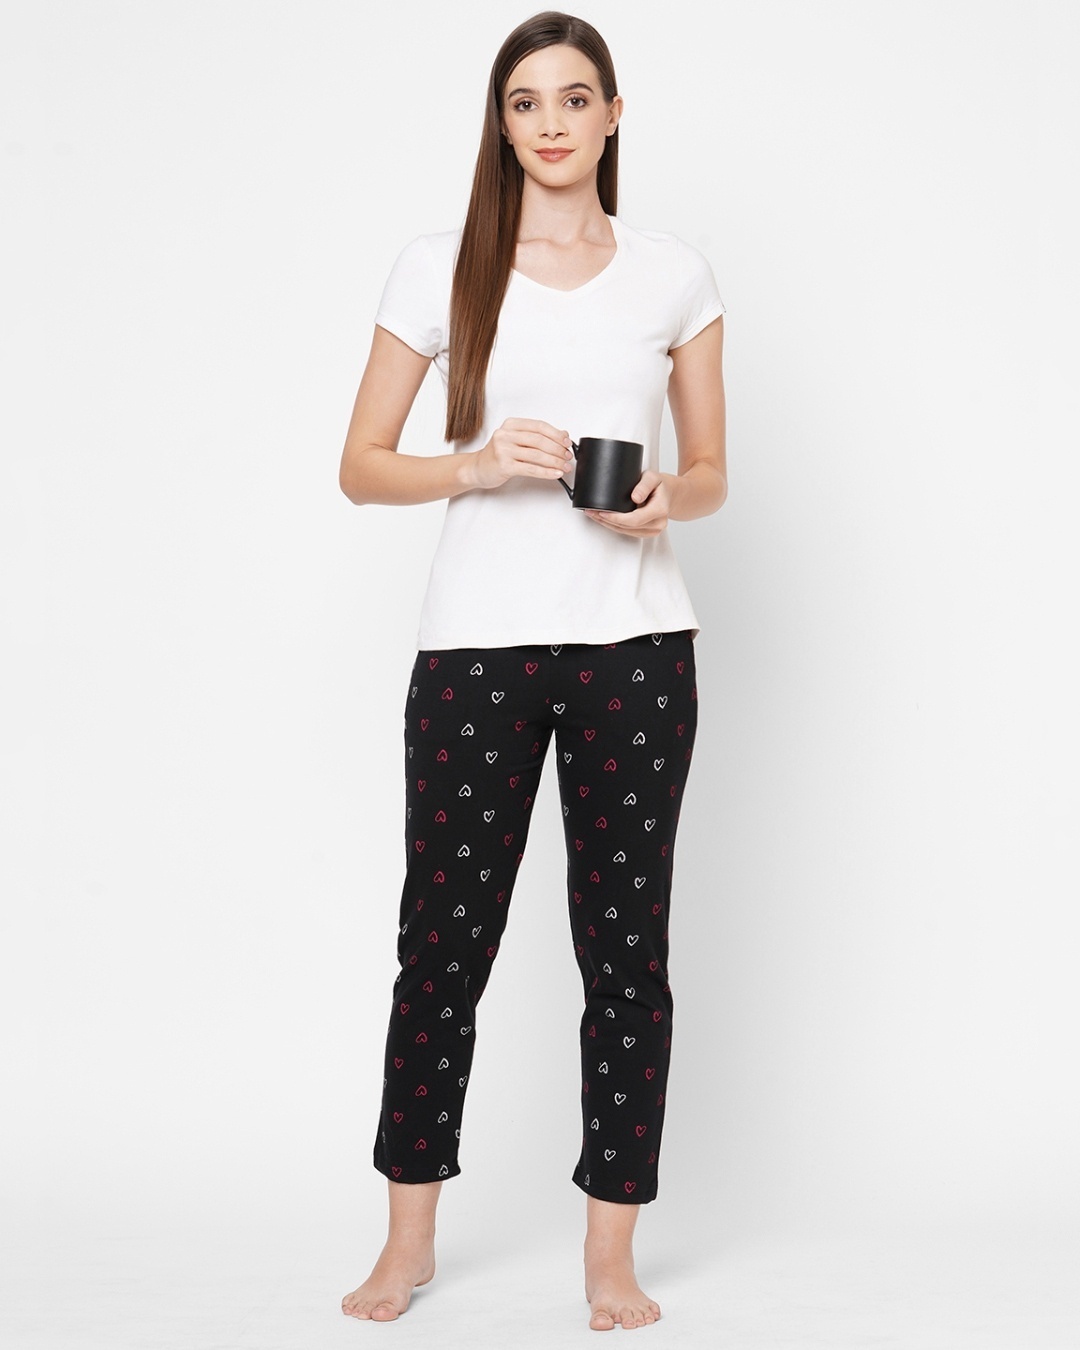 Shop Women's Black All Over Heart Printed Lounge Pants